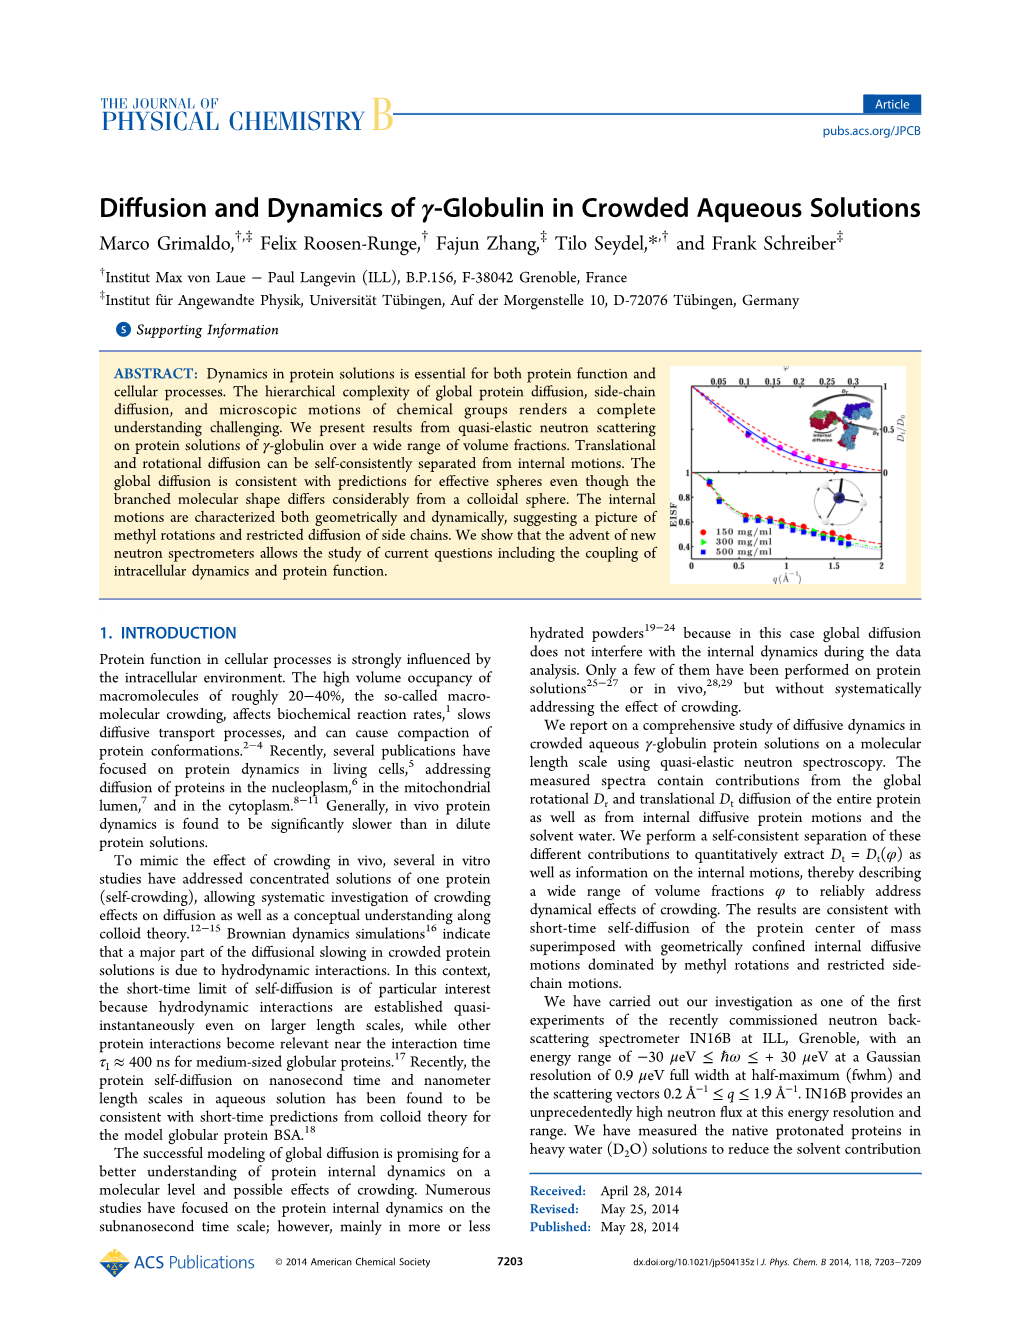 Diffusion and Dynamics of Γ‑Globulin in Crowded Aqueous Solutions